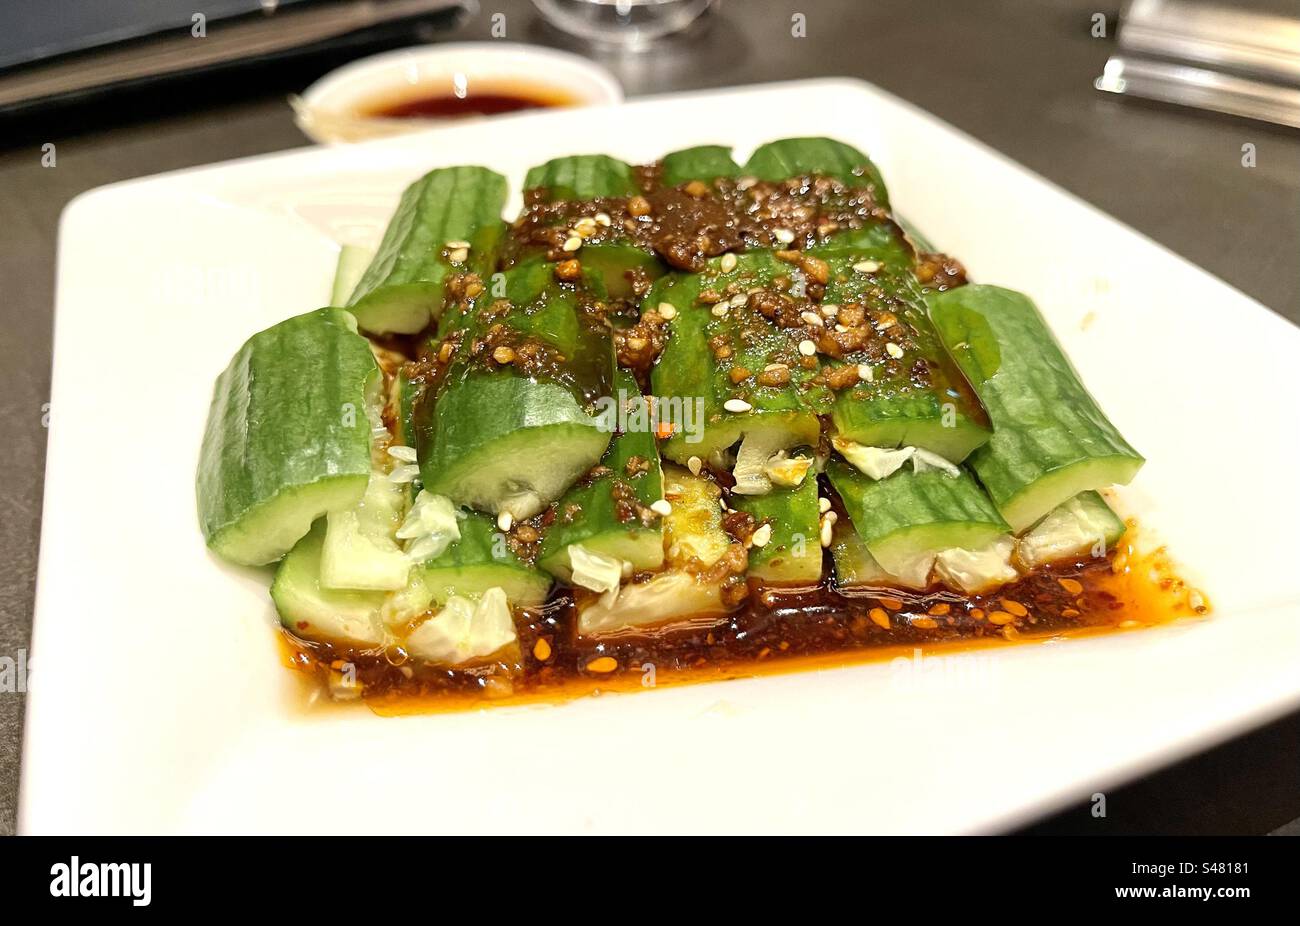 Plated Taiwanese dish of Cucumber in a spicy sauce at Din Tai Fung restaurant Stock Photo